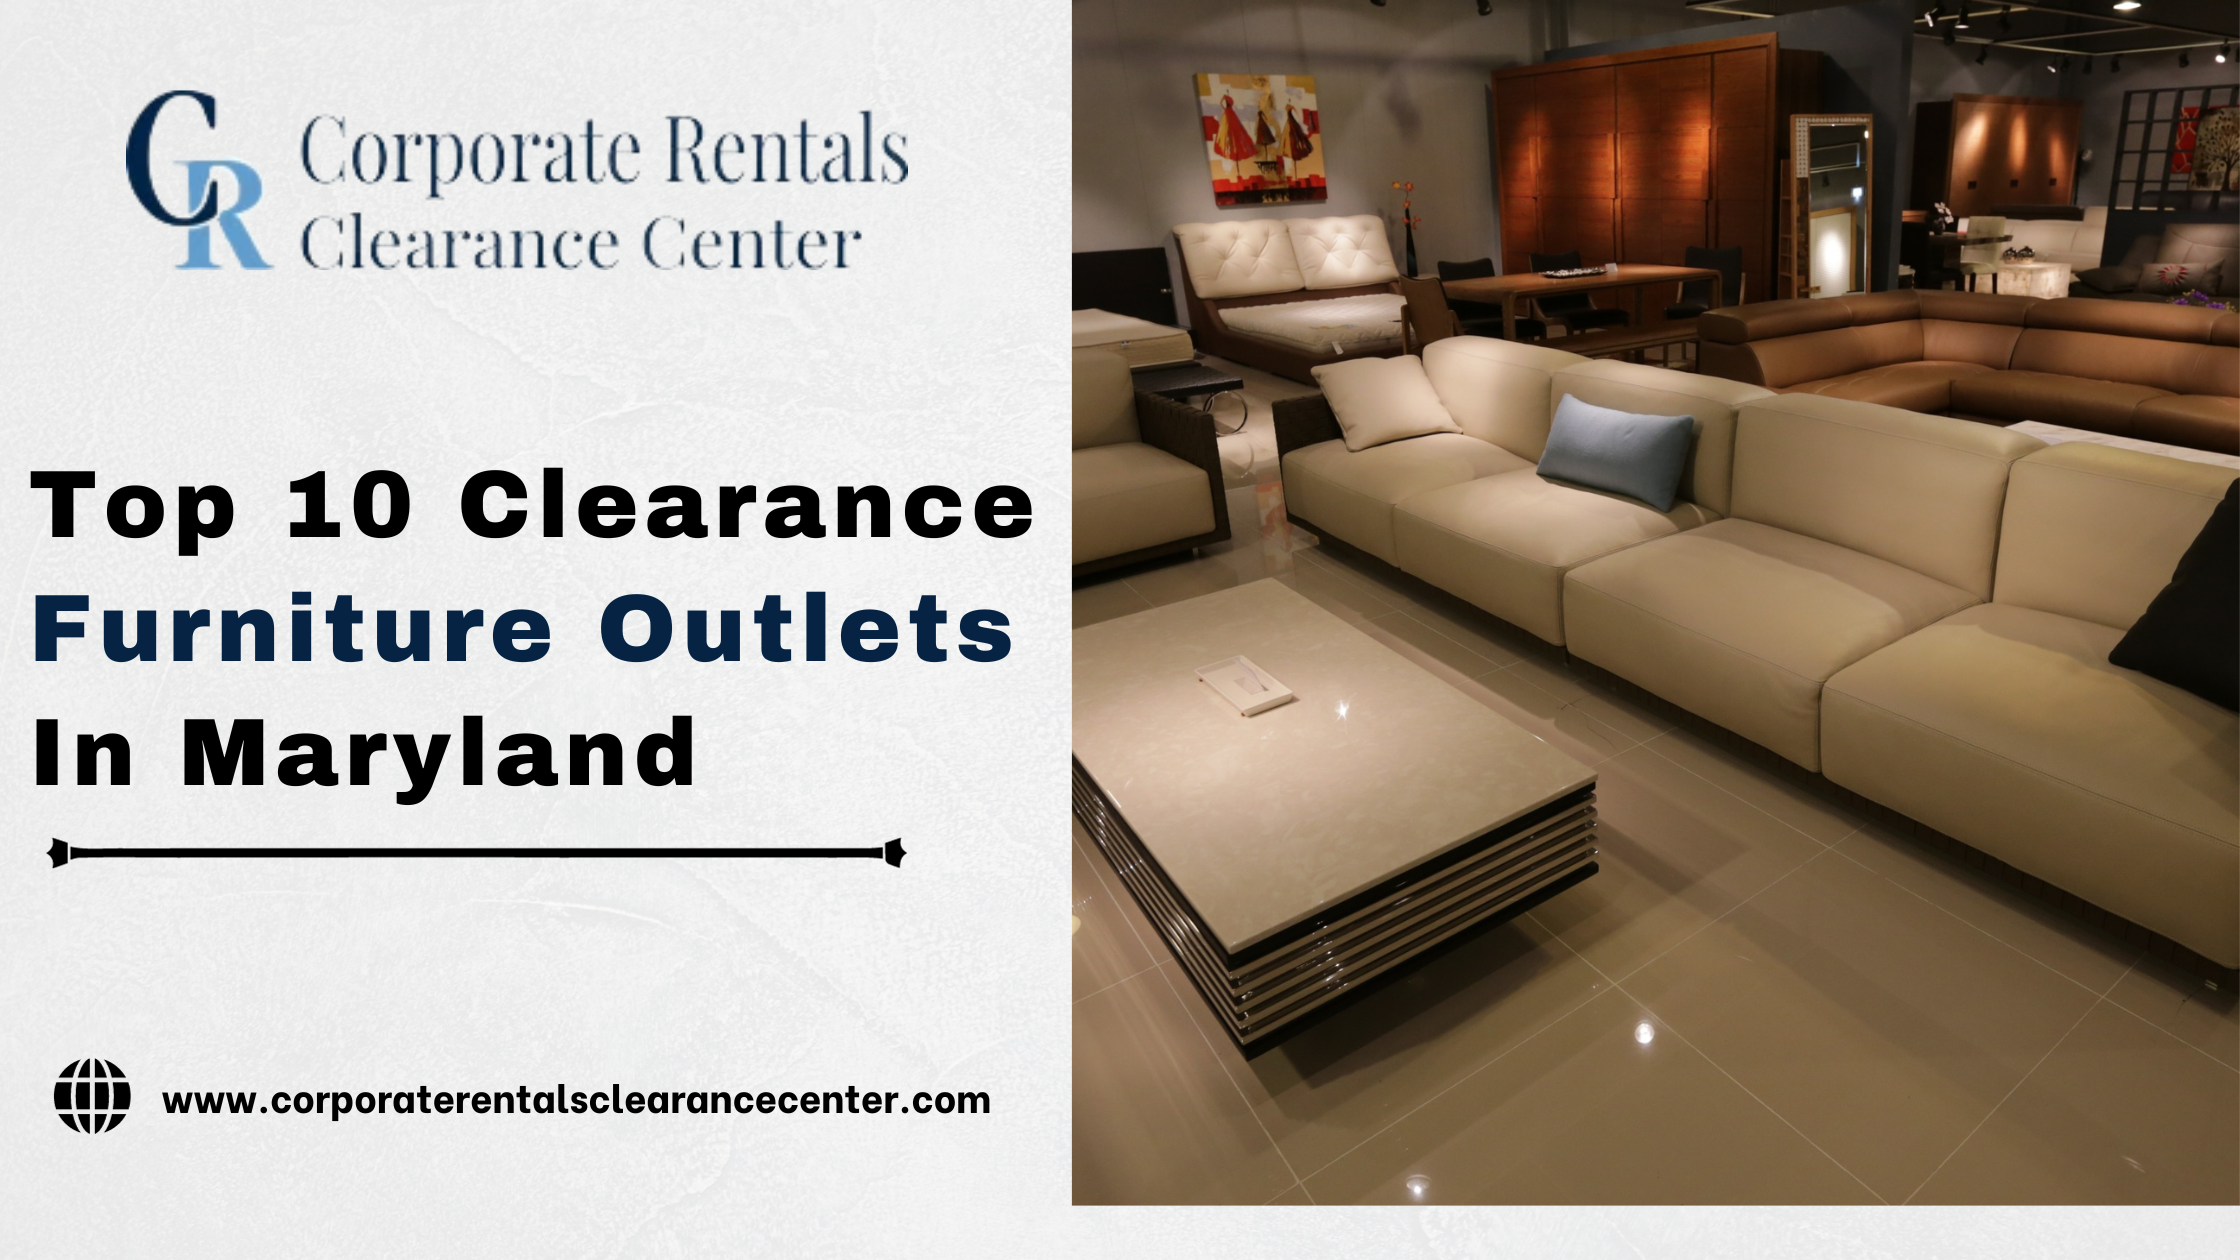 Top 10 Clearance Furniture Outlets In Maryland- corporaterentalsclearancecenter